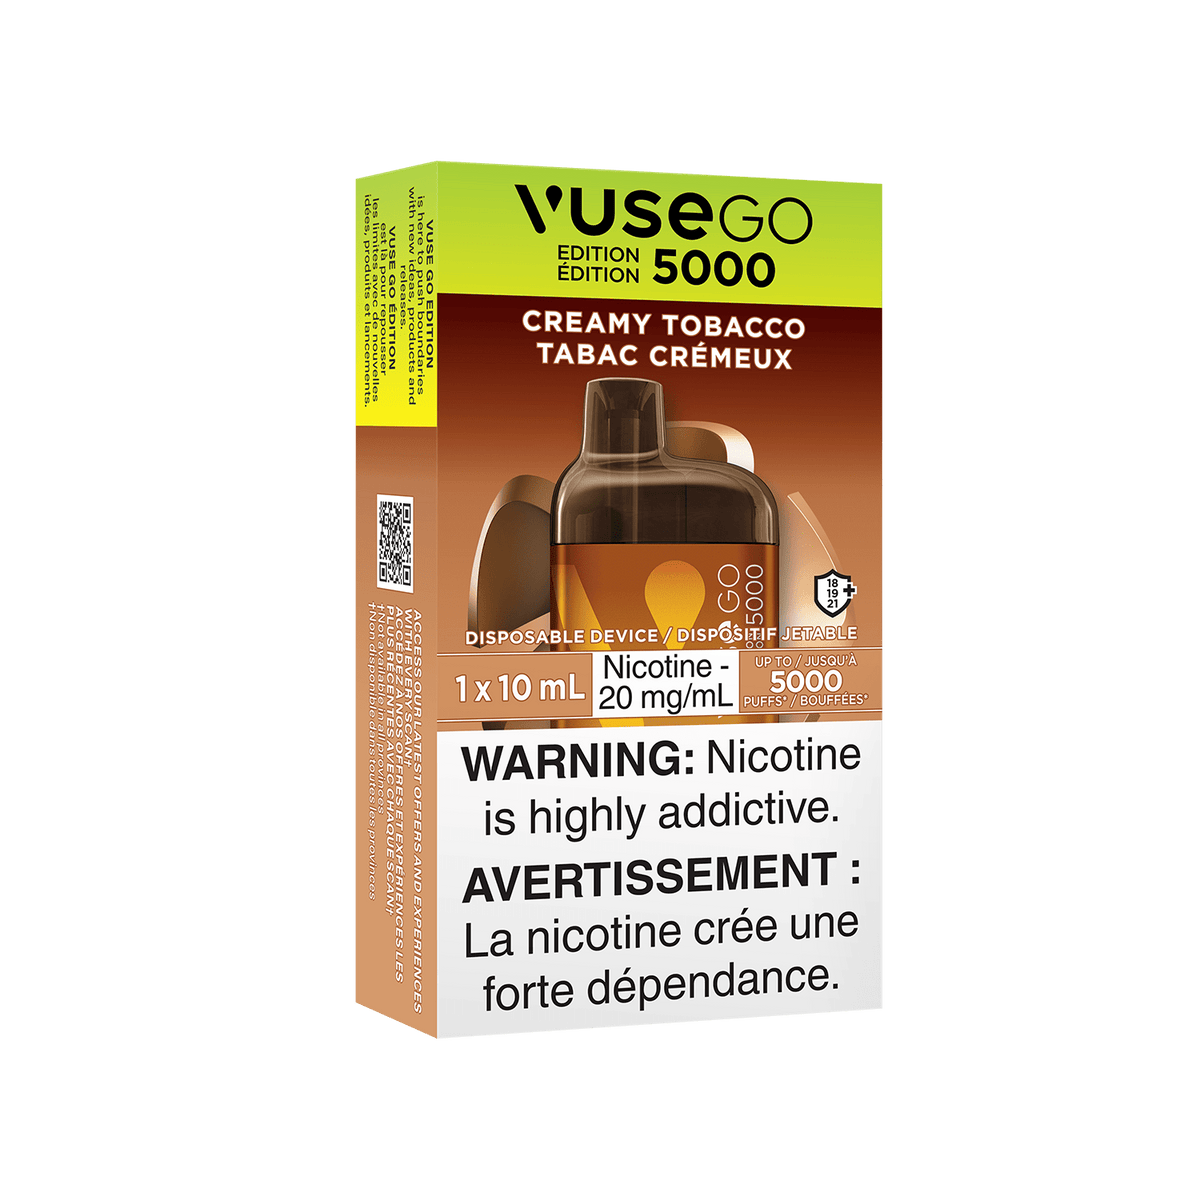 Vuse GO Edition 5000  -  Creamy Tobacco Disposable Vape available on Canada online vape shop